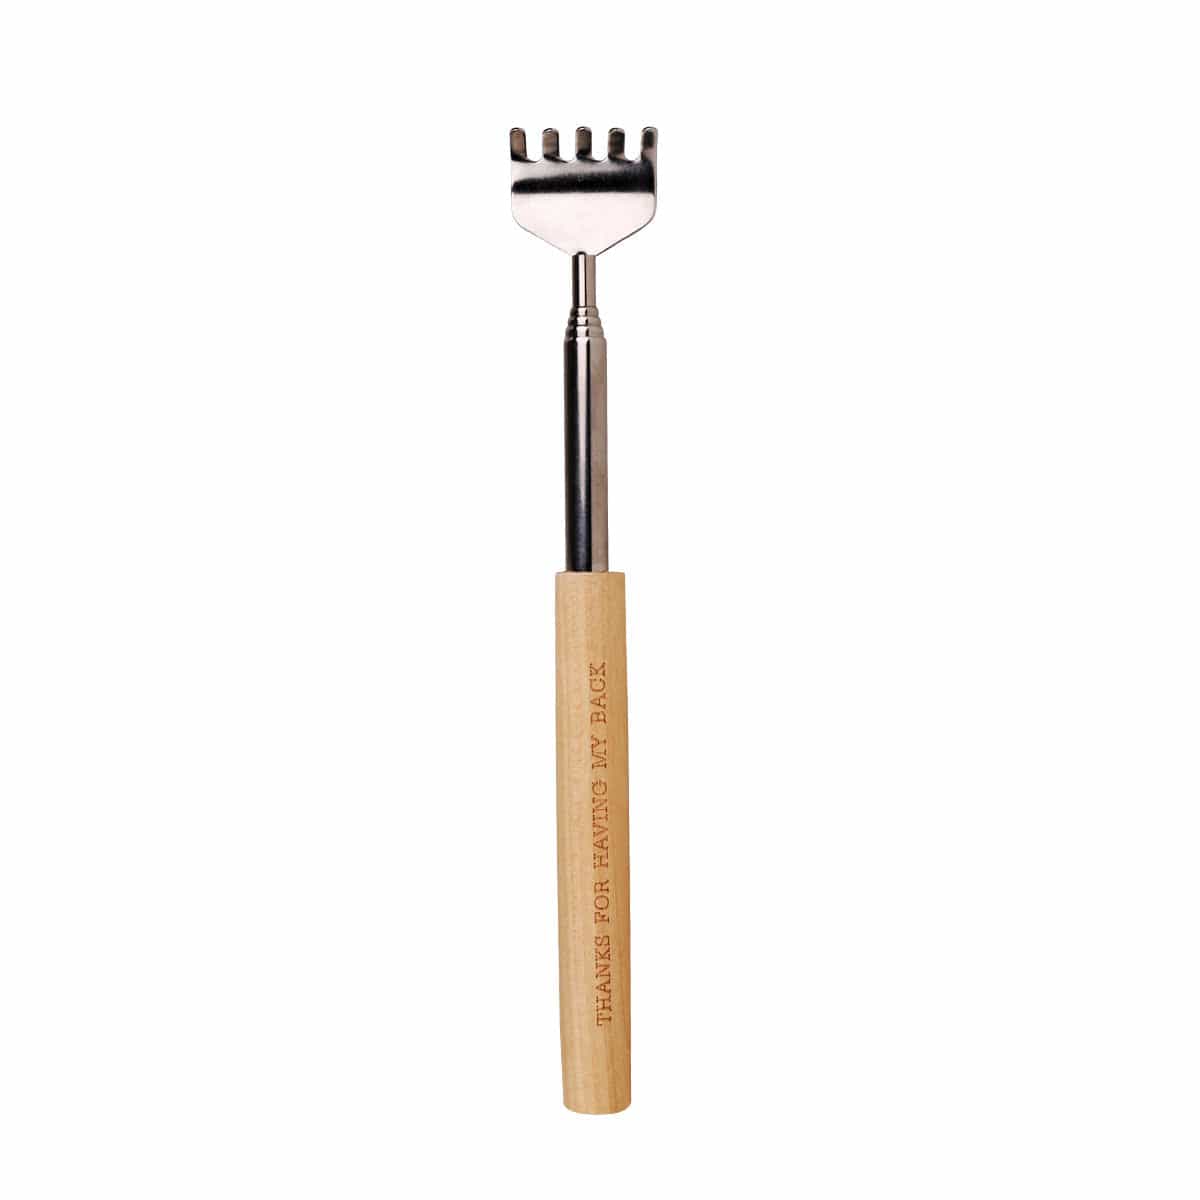 Extendable Back Scratcher - Displayer of 25